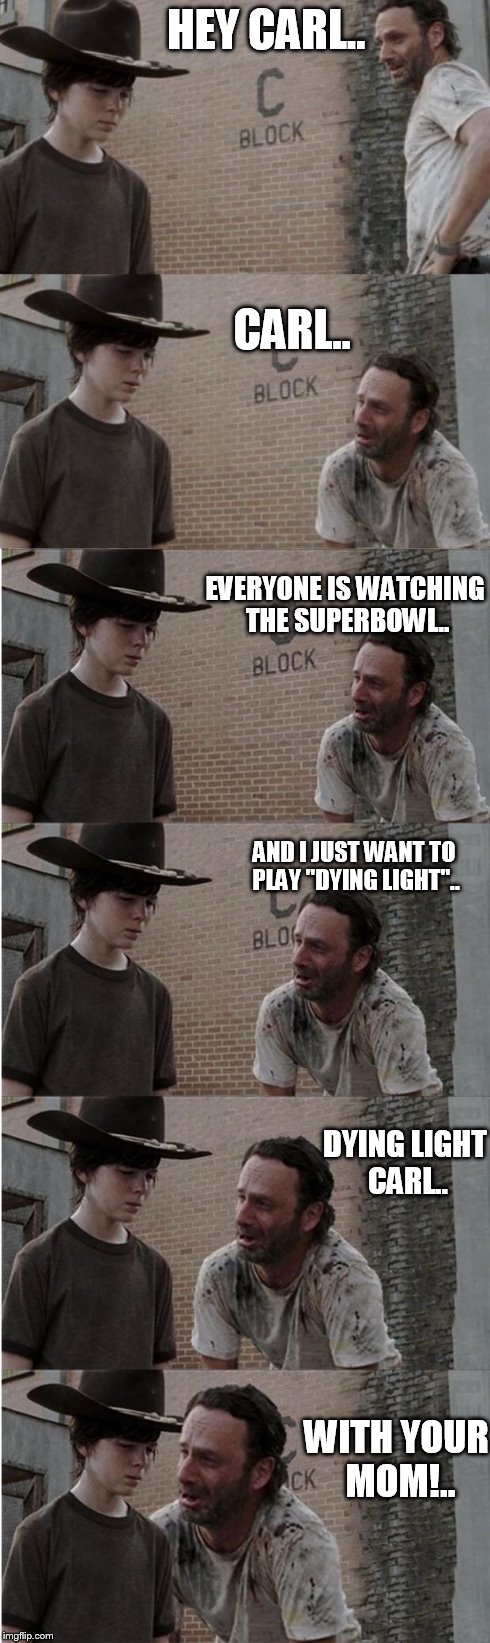 Rick and Carl Longer | HEY CARL.. WITH YOUR MOM!.. CARL.. EVERYONE IS WATCHING THE SUPERBOWL.. AND I JUST WANT TO PLAY "DYING LIGHT".. DYING LIGHT CARL.. | image tagged in memes,rick and carl longer | made w/ Imgflip meme maker